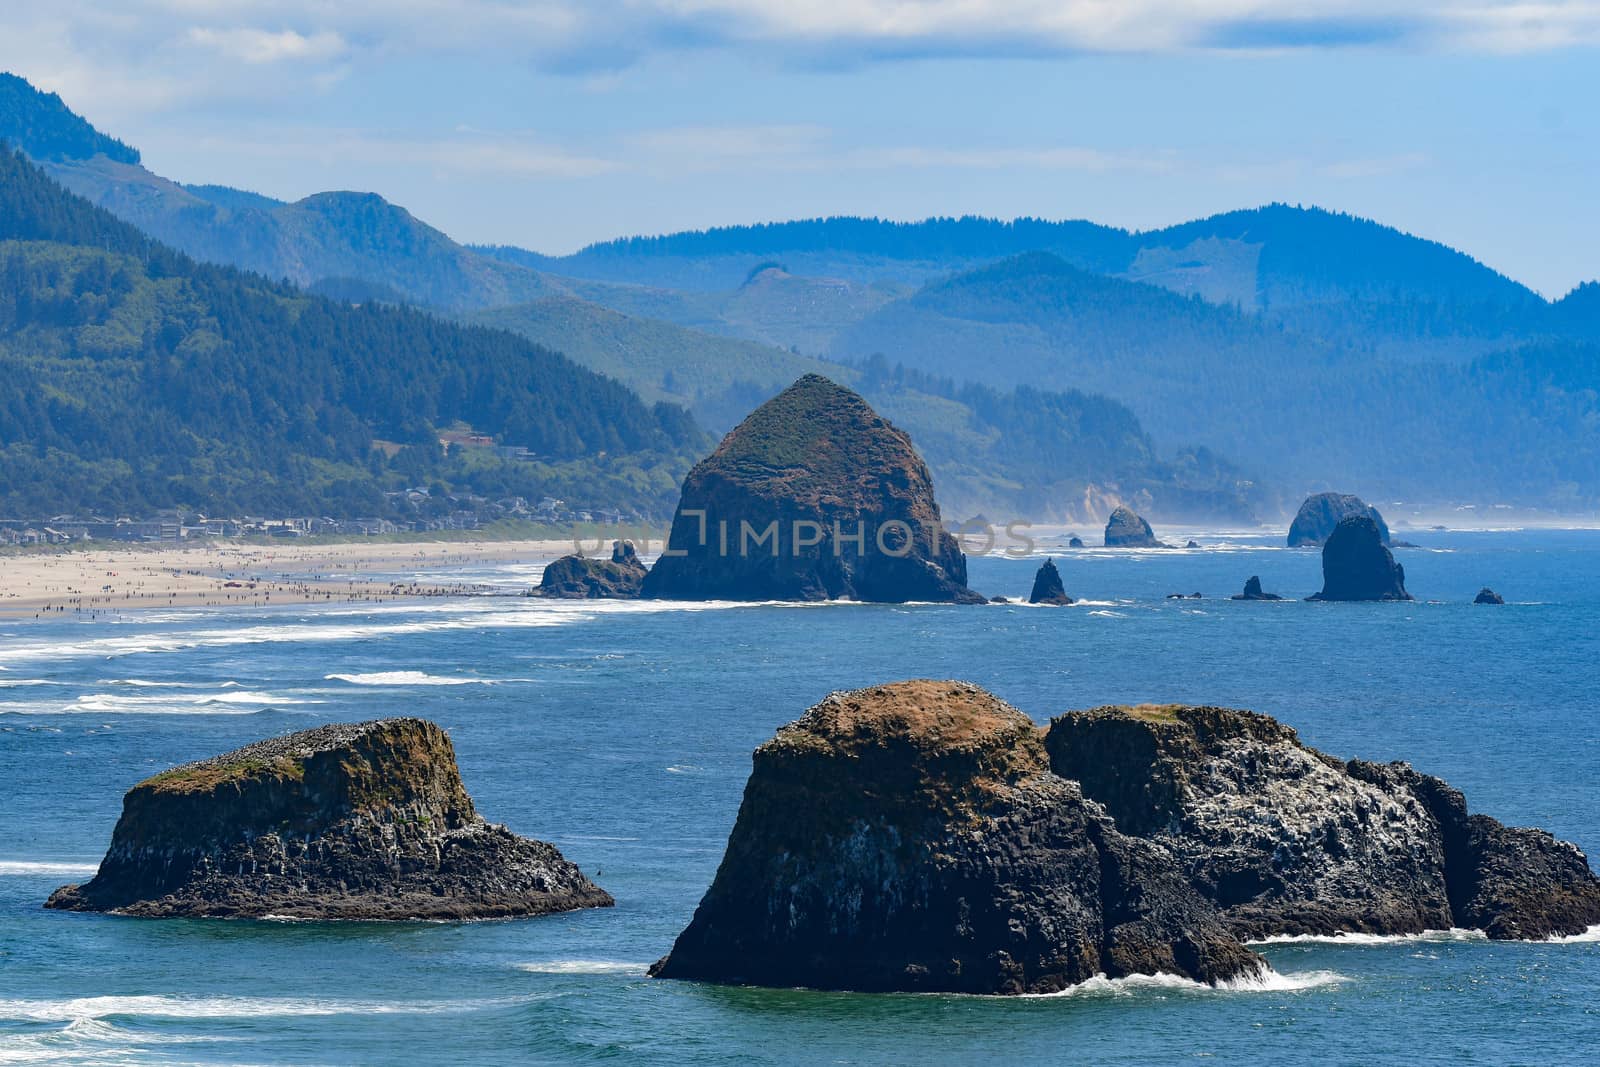 Cannon Beach viewed from Highway 101 on the Oregon Coast